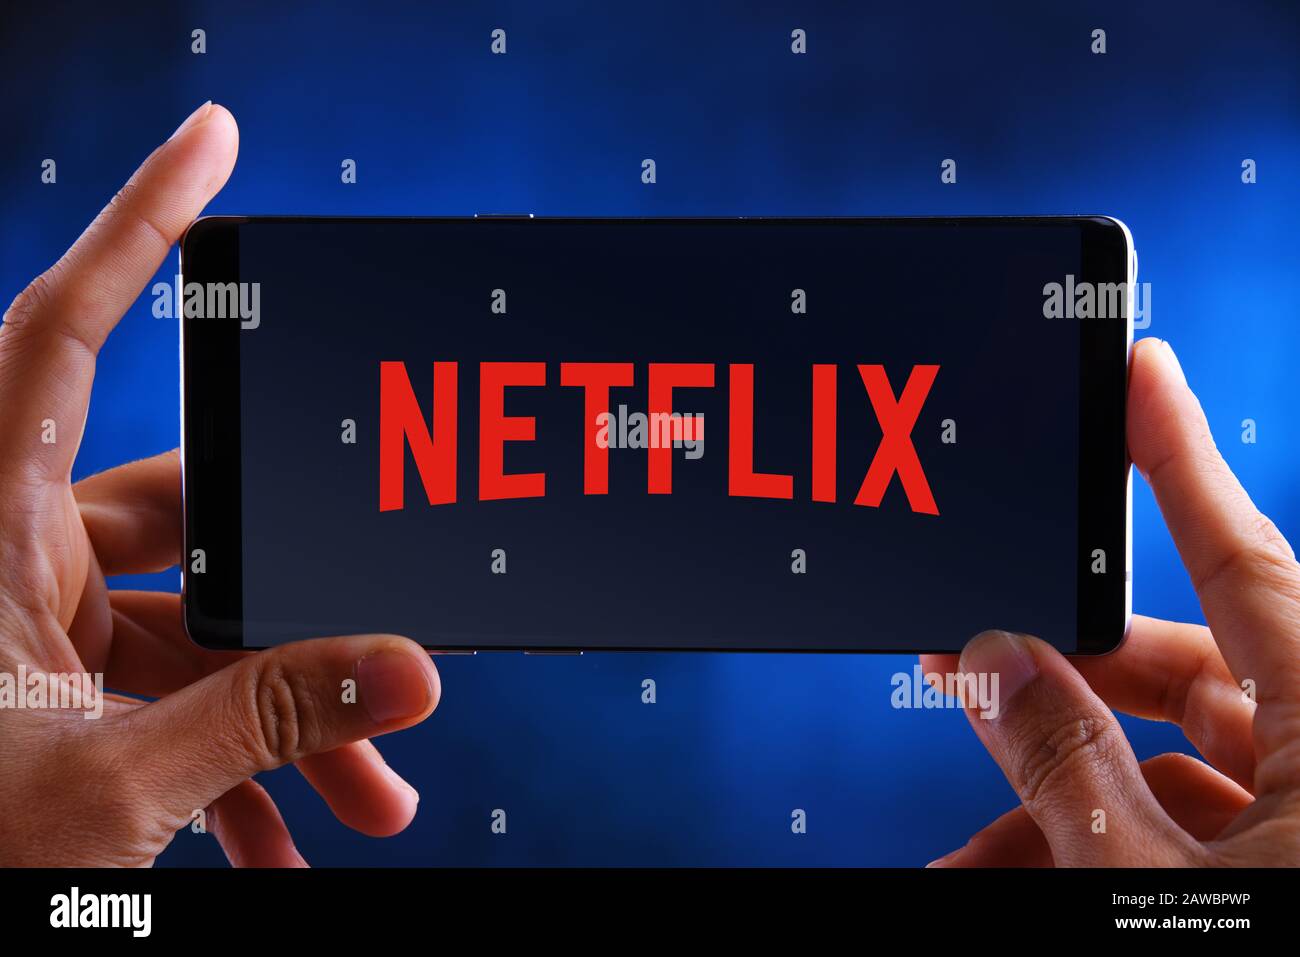 POZNAN, POL - JUL 10, 2019: Hands holding smartphone displaying logo of Netflix, an American media-services provider headquartered in Los Gatos, Calif Stock Photo